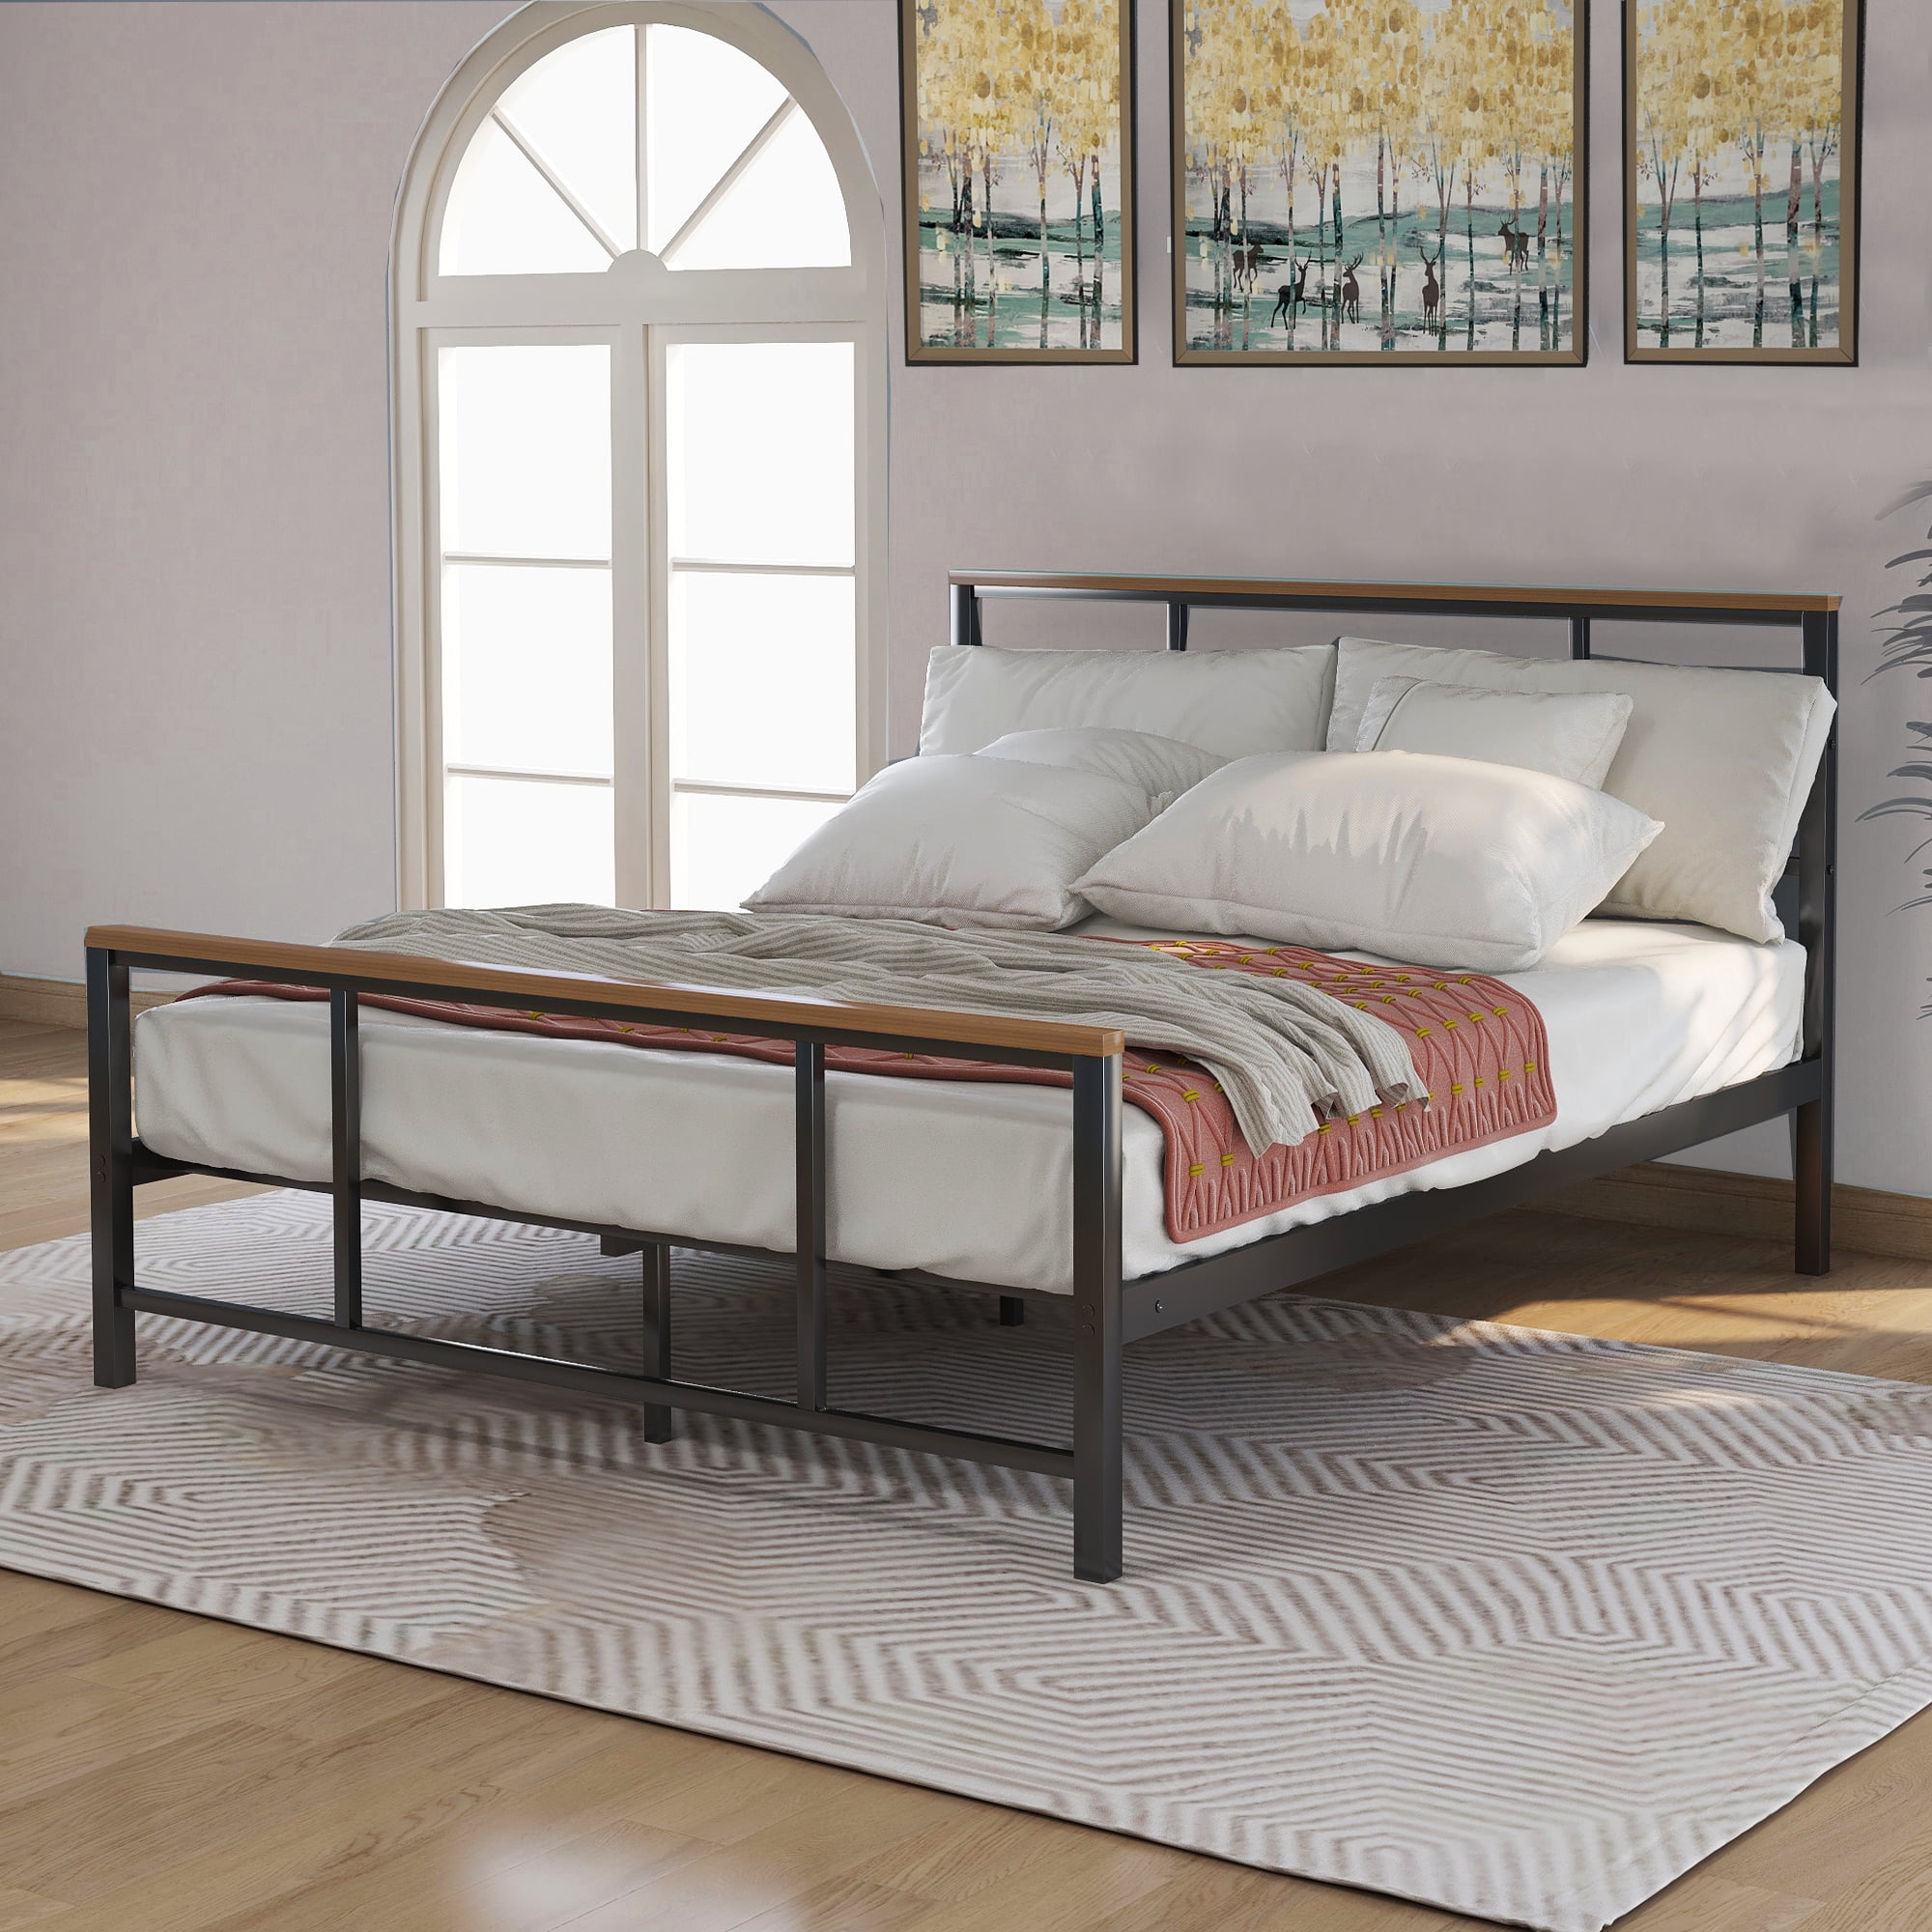 Metal Full Platform Bed Frame Black, Does A Metal Bed Frame Need A Boxspring